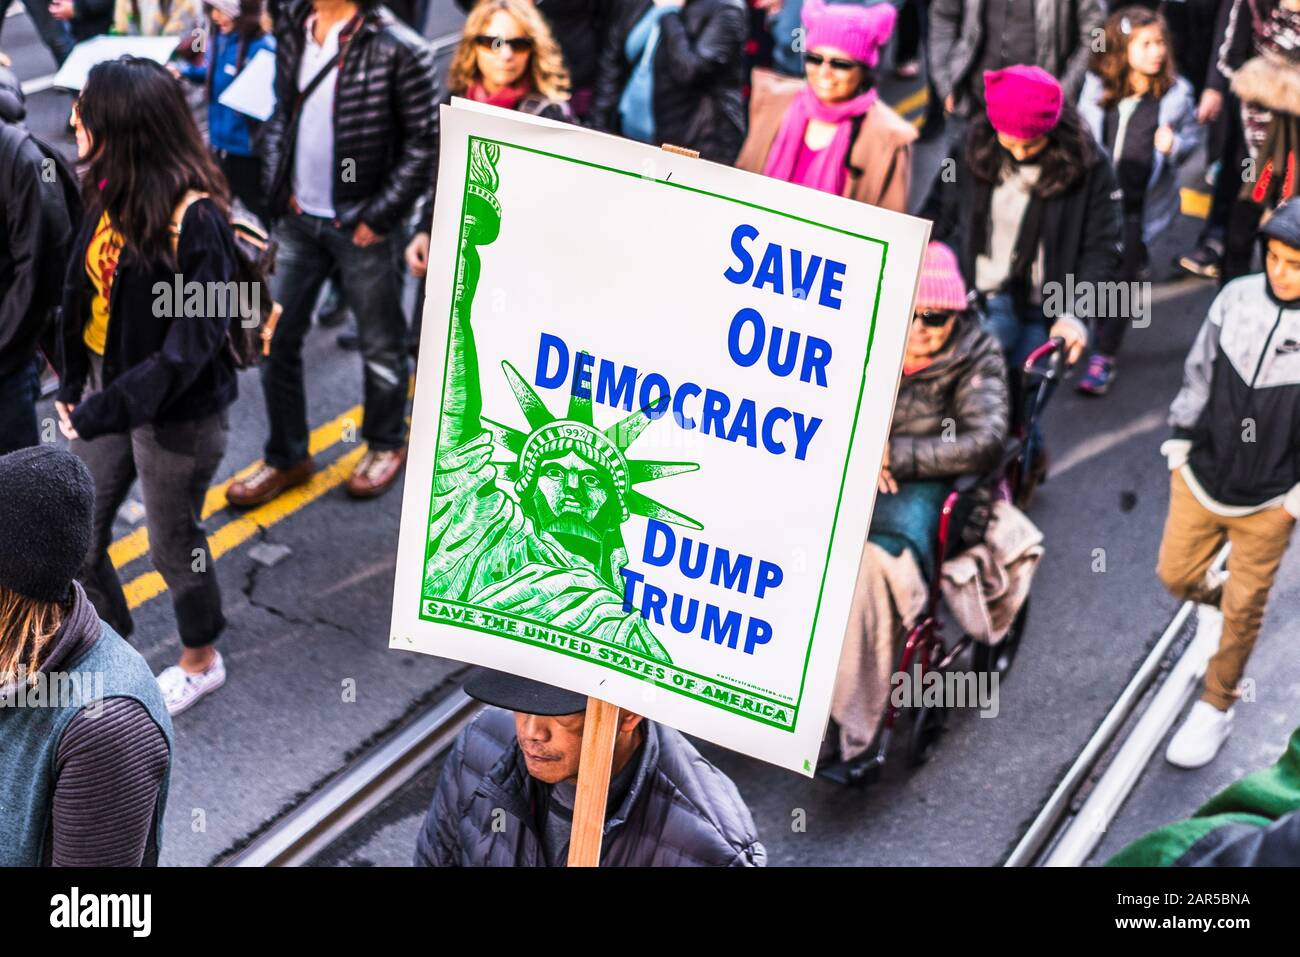 Jan 18, 2020 San Francisco / CA / USA - Participant to the Women's March event holds a sign asking for Trump's removal while marching on Market street Stock Photo